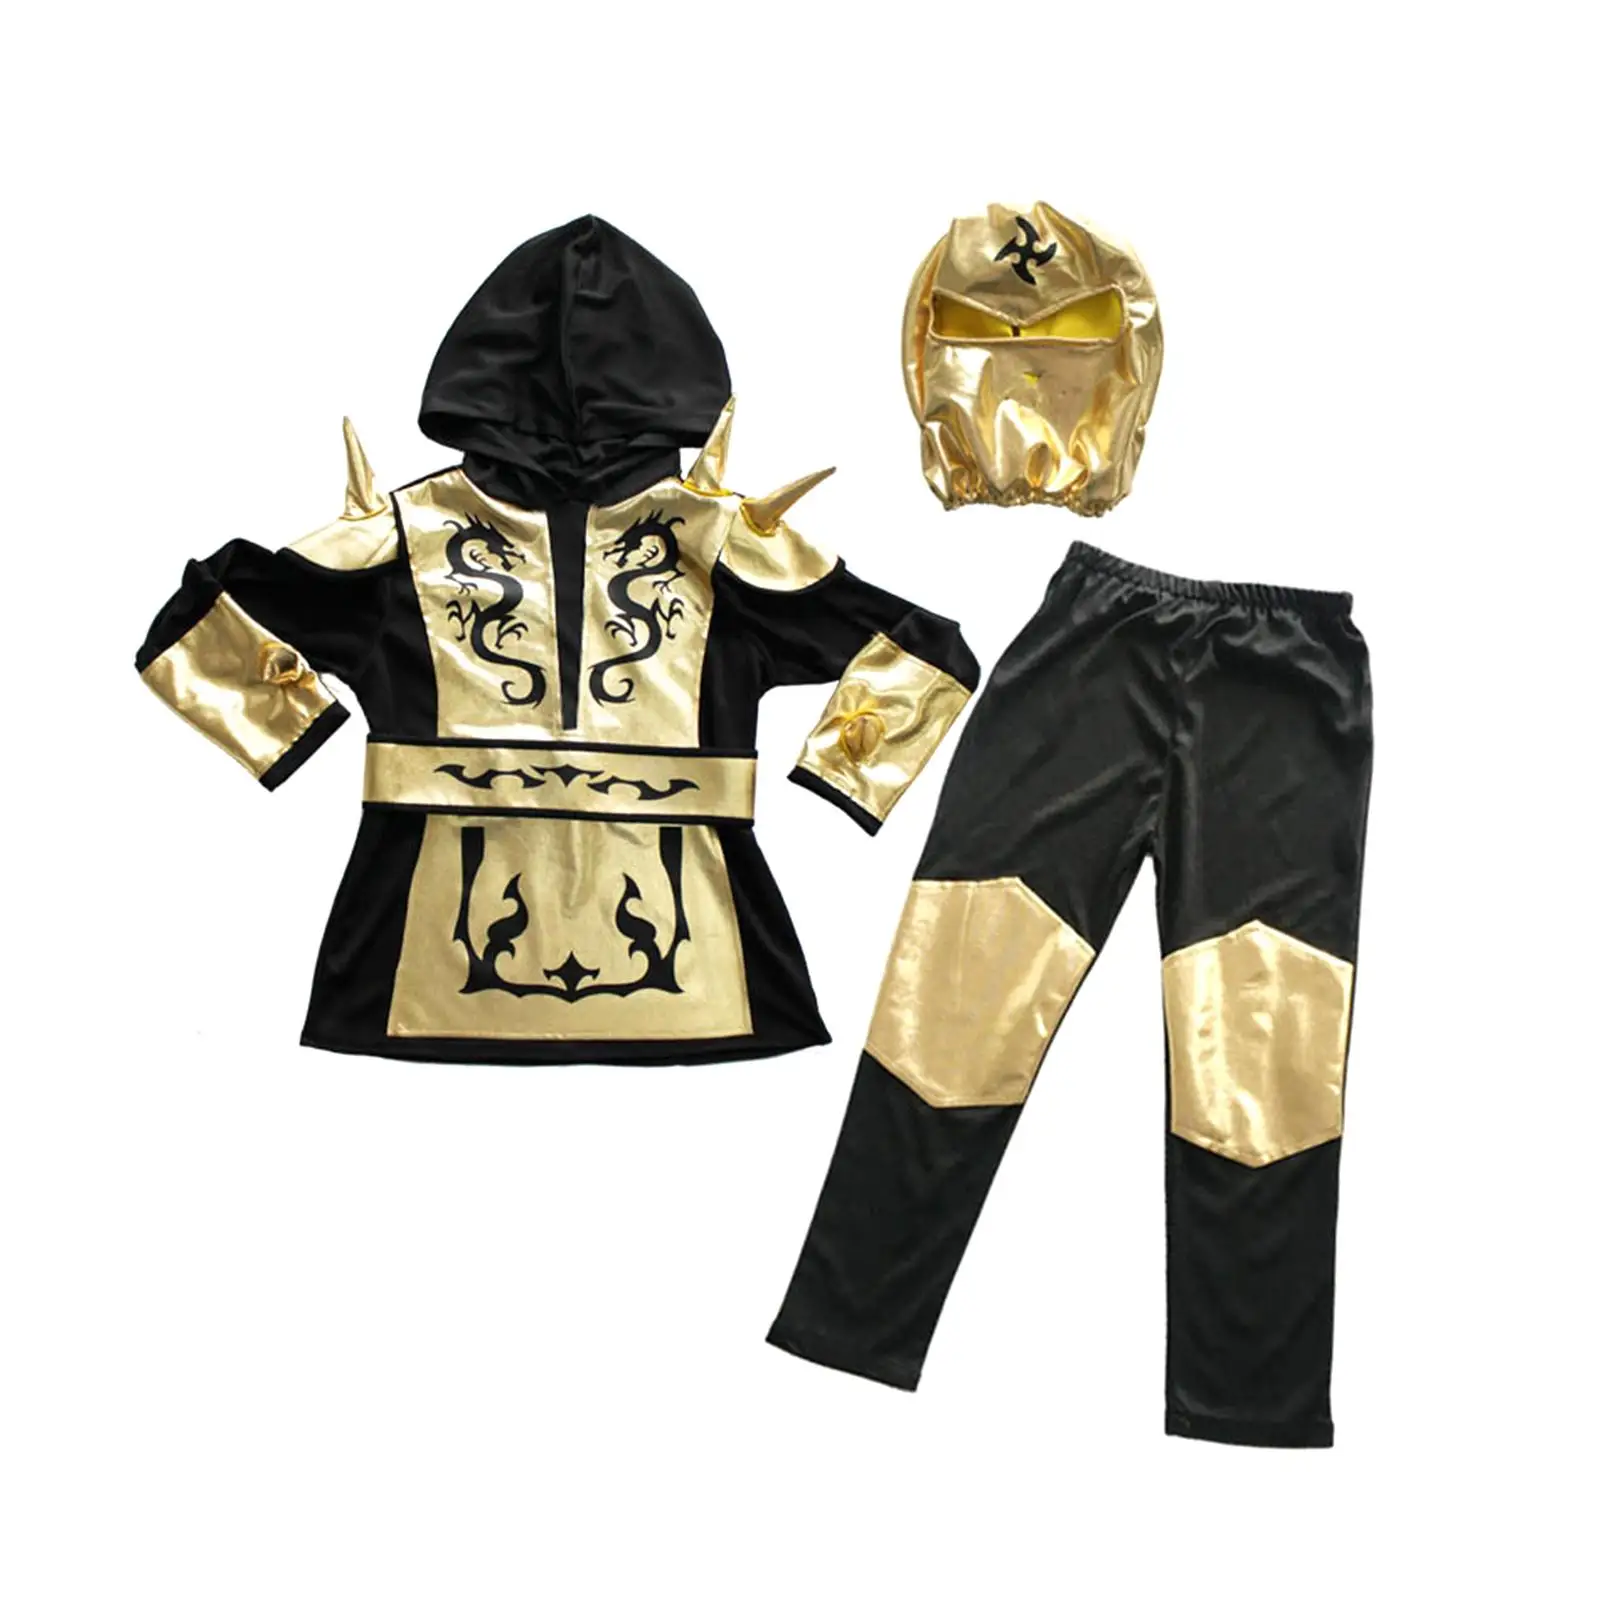 Kids Boys Costume Child Fancy Dress up Clothes for Halloween